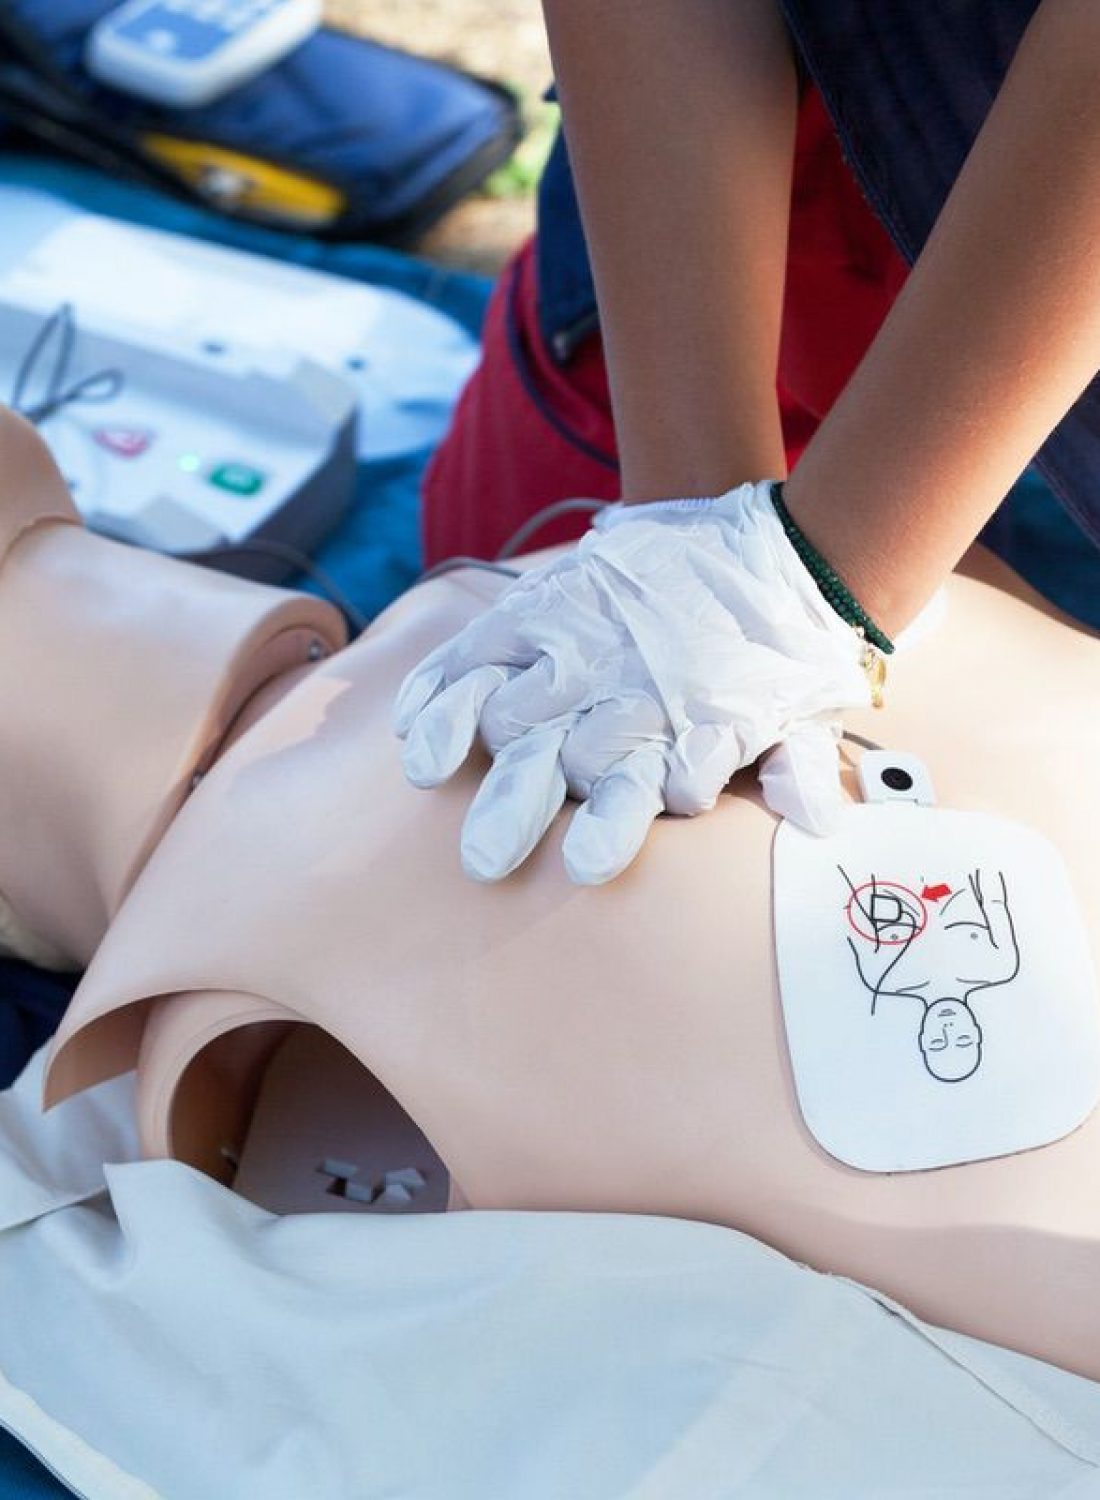 First aid training using automated external defibrillator device - AED